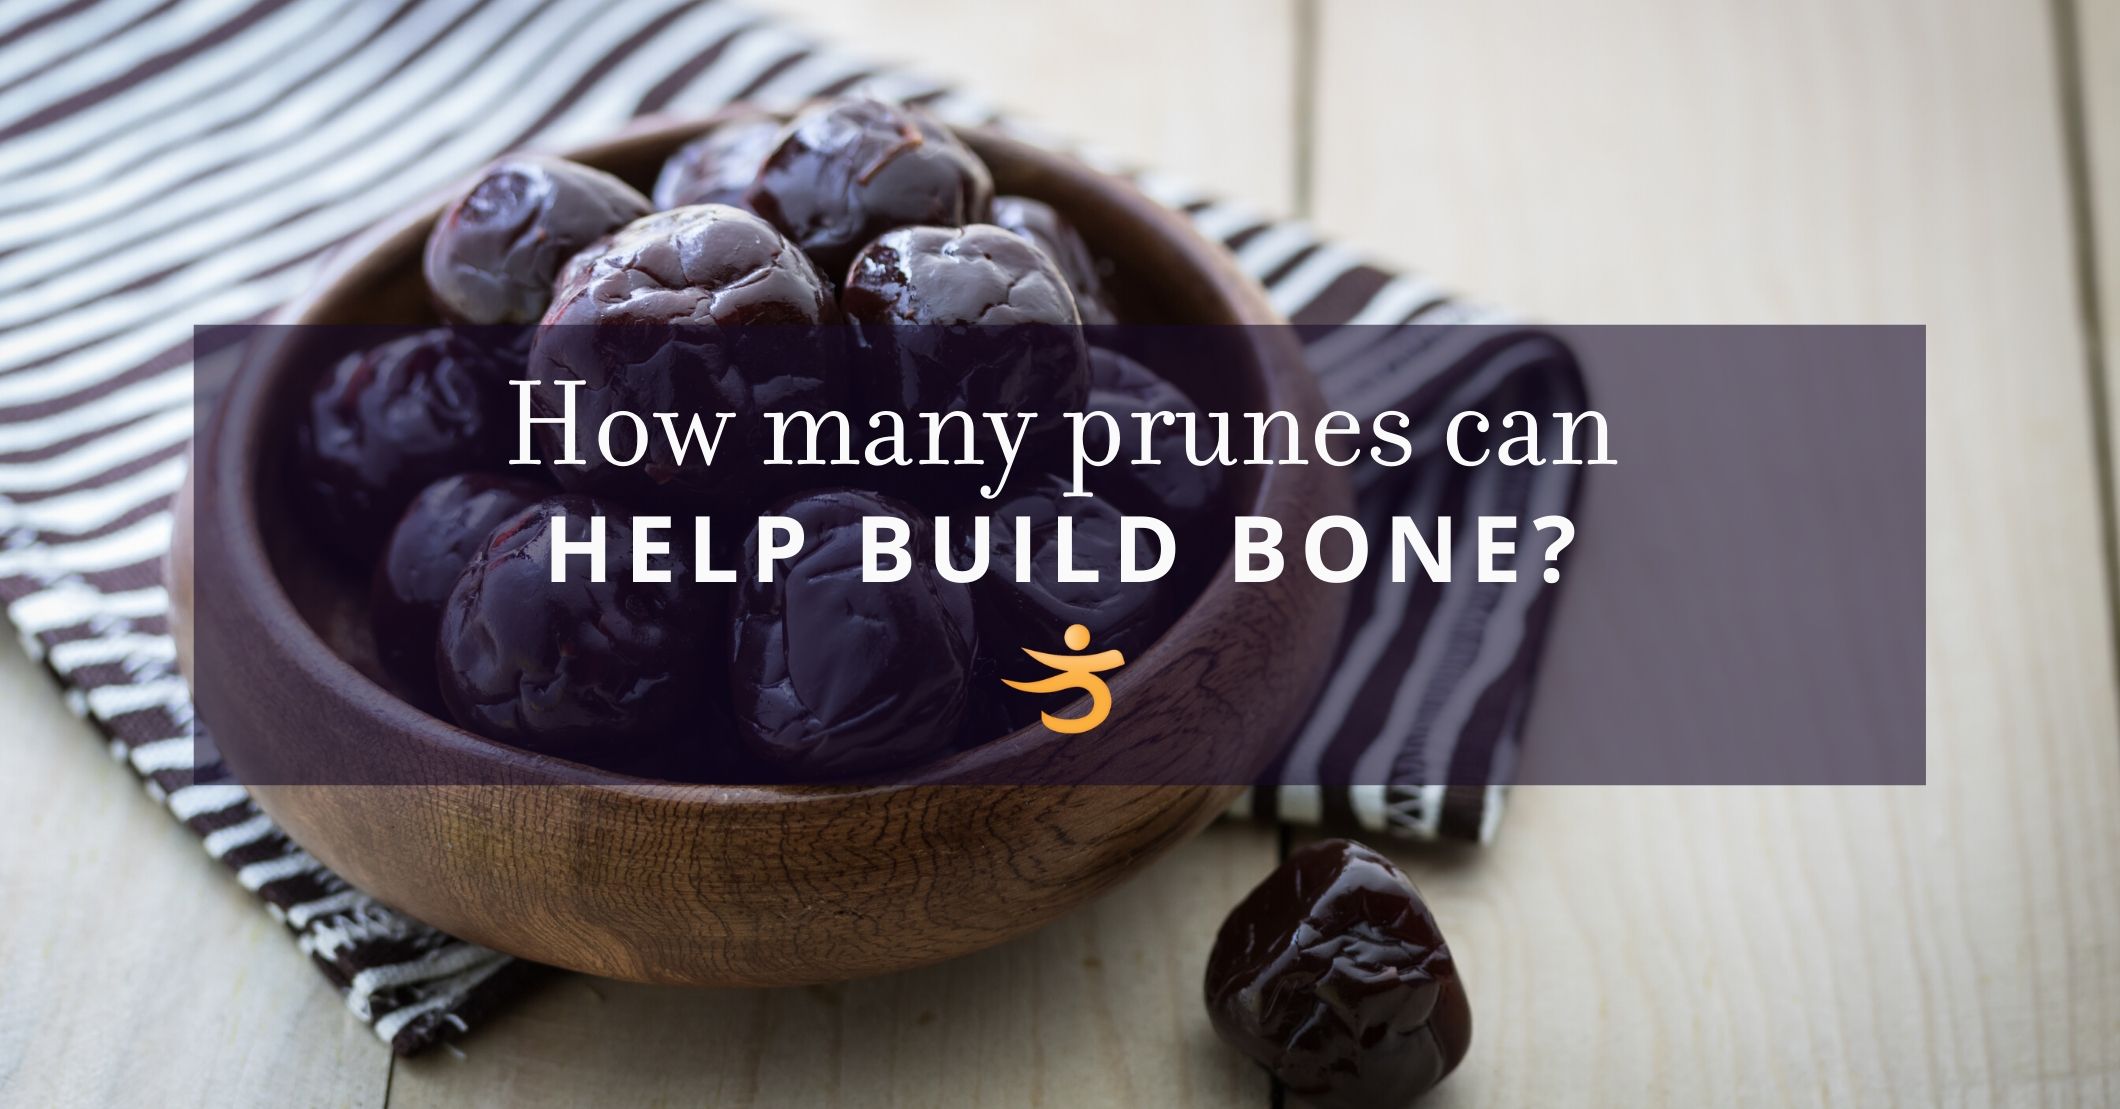 How many prunes do you need to eat to start building bone?